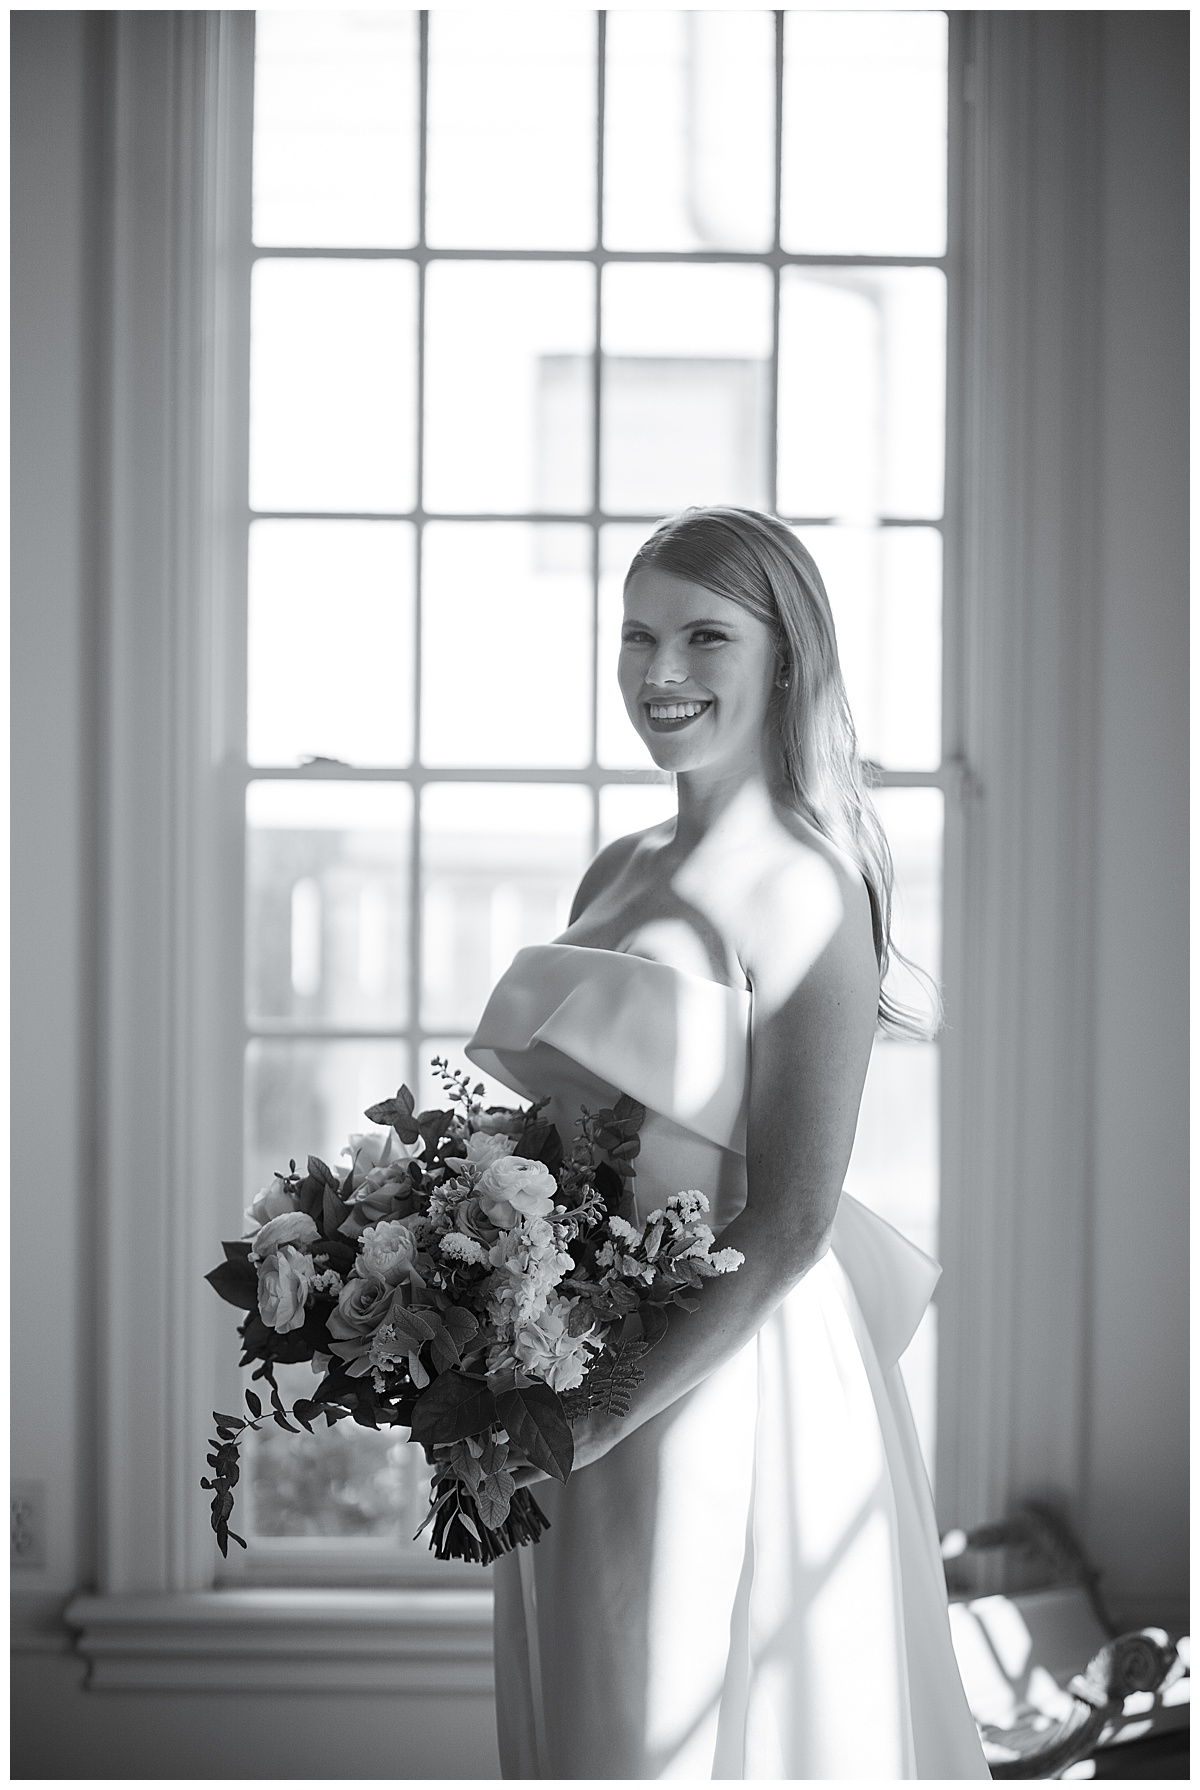 Bride smiles big holding bouquet for Stunning Bridal Portraits at The Creative Chateau